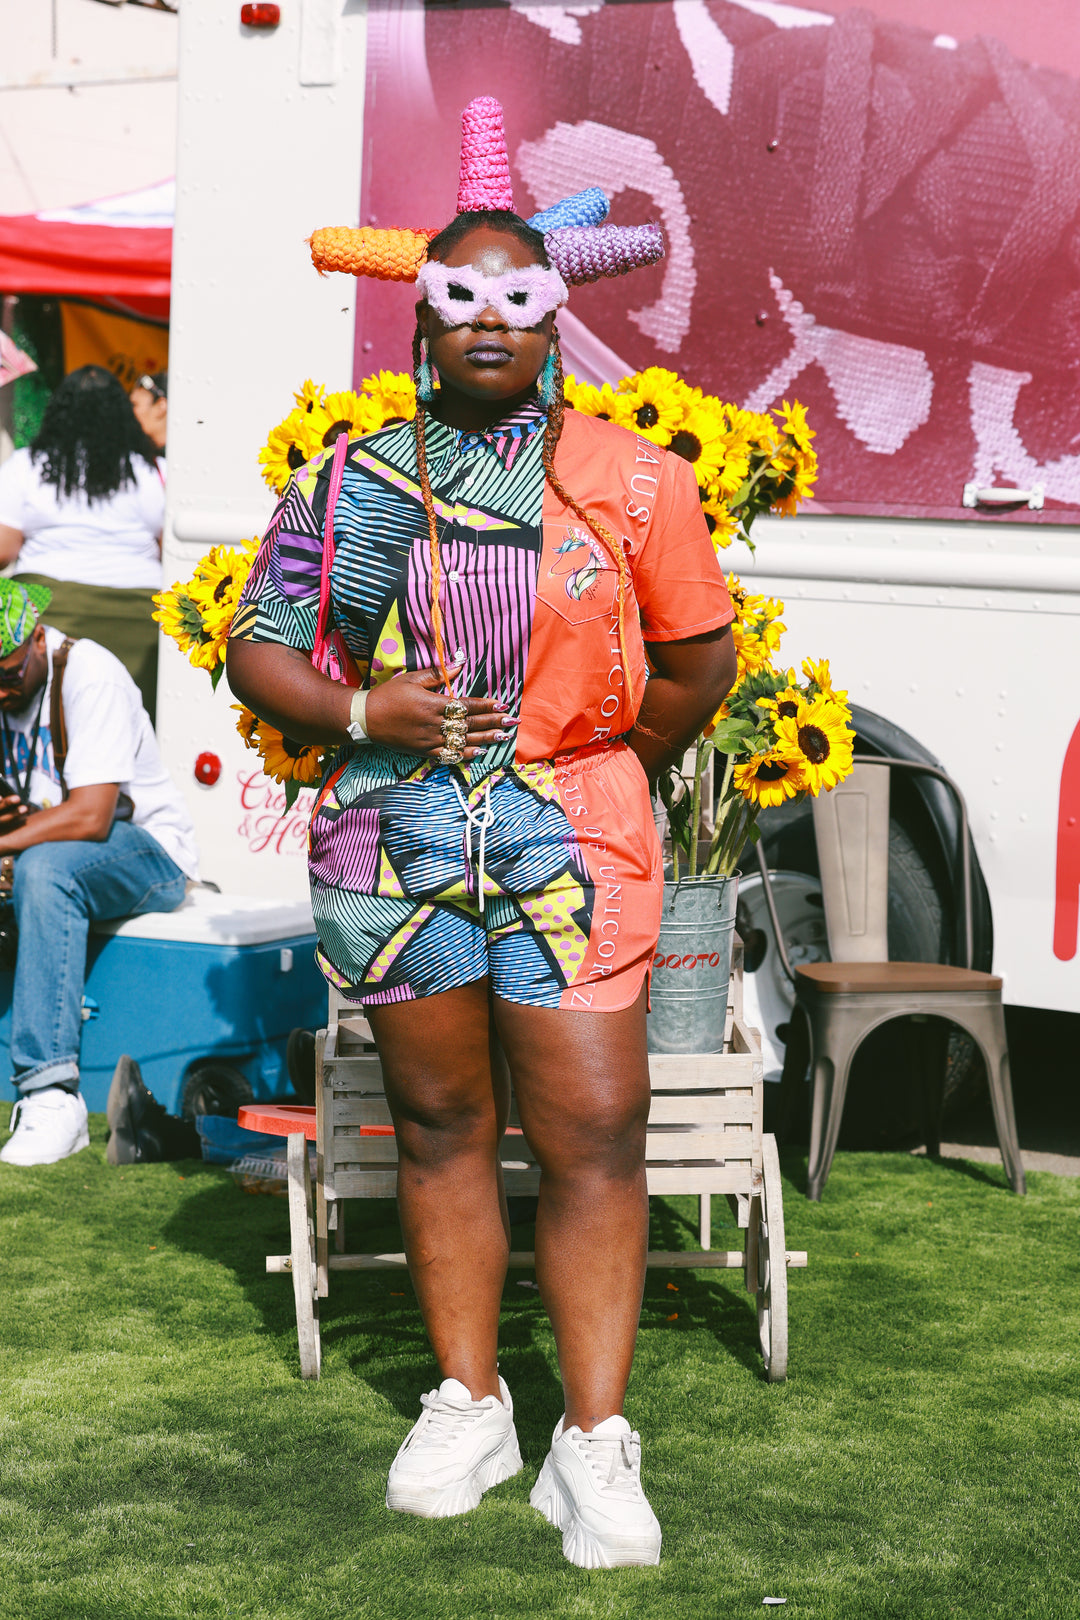 Juneteenth celebration. Woman wearing colorful clothing